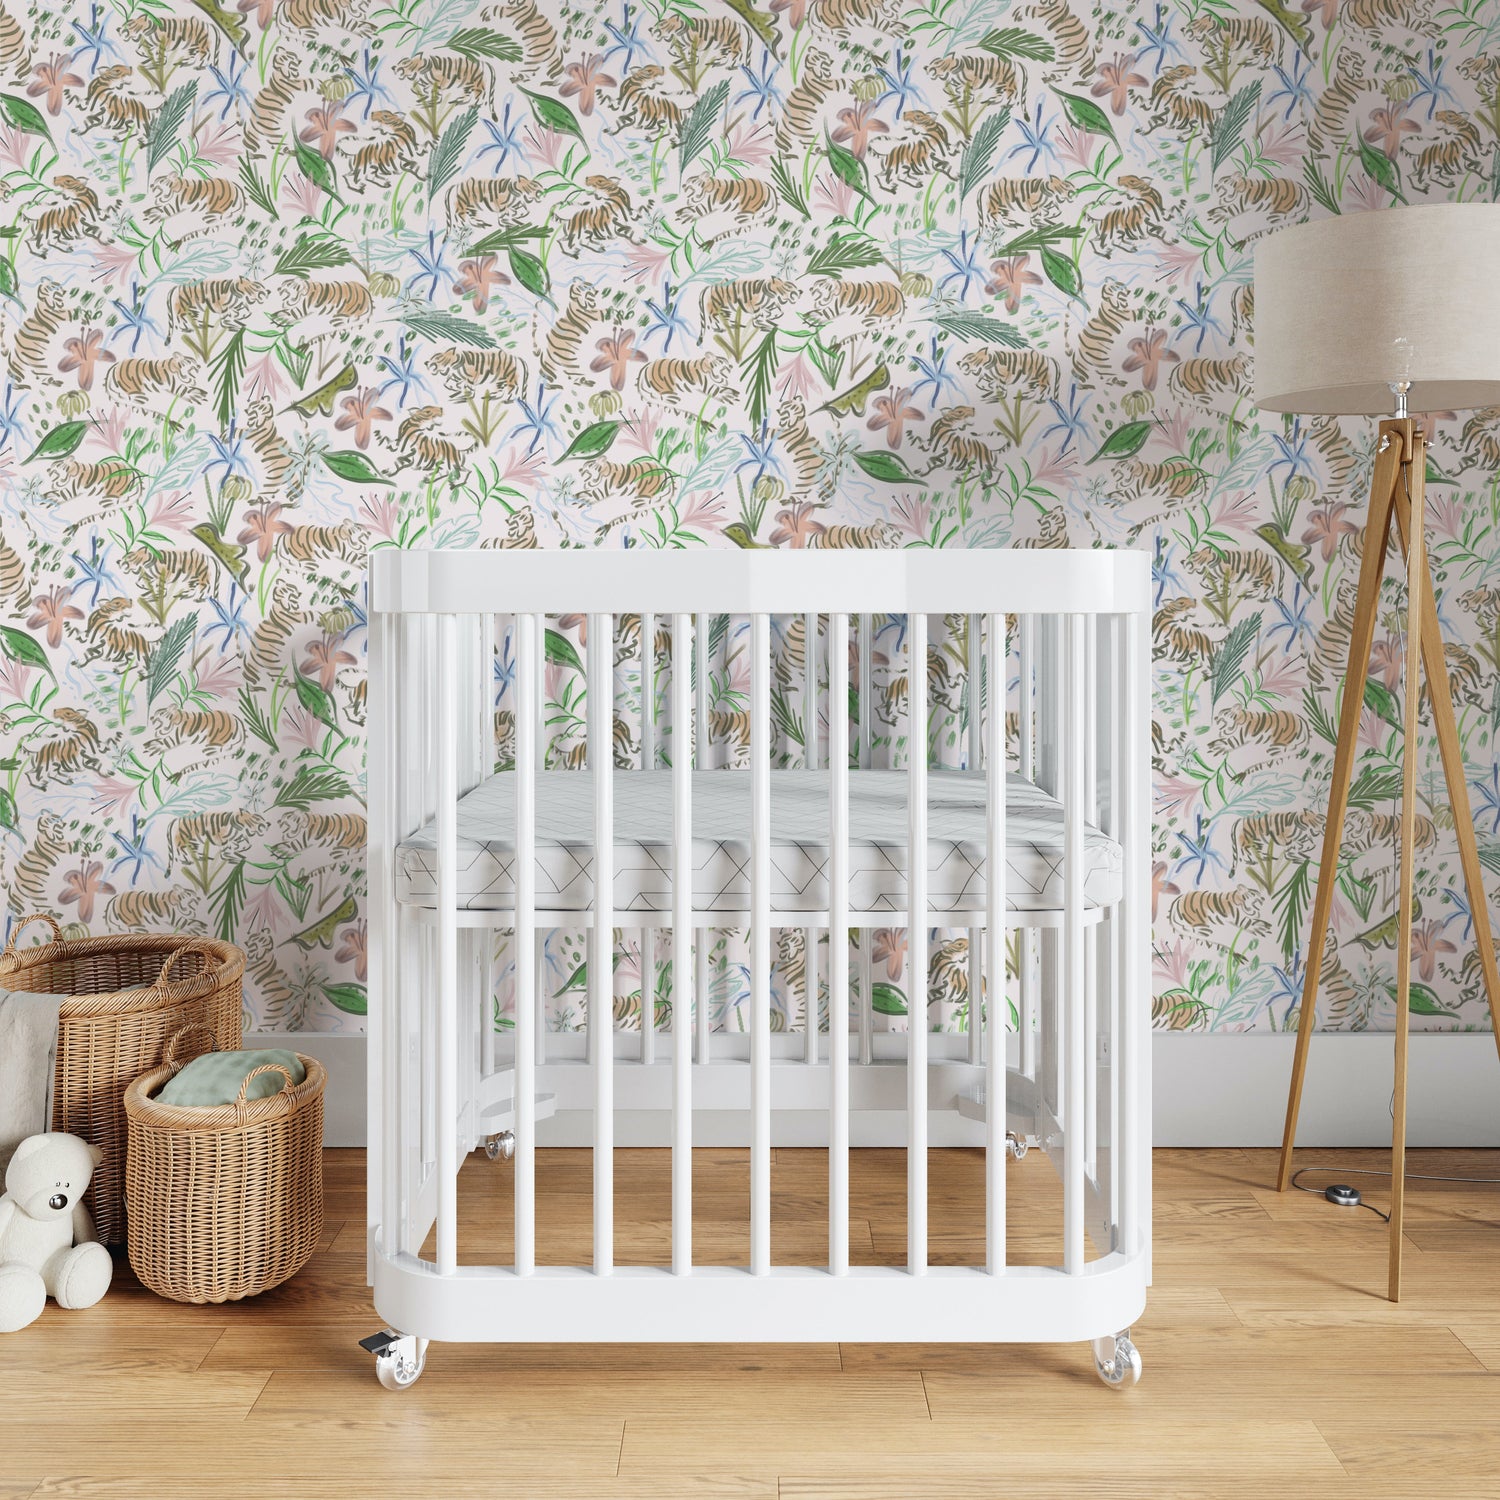 Nursery room styled with Pink Chinoiserie Tiger Printed Wallpaper and white crib next to two baskets and wooden lamp on the other side